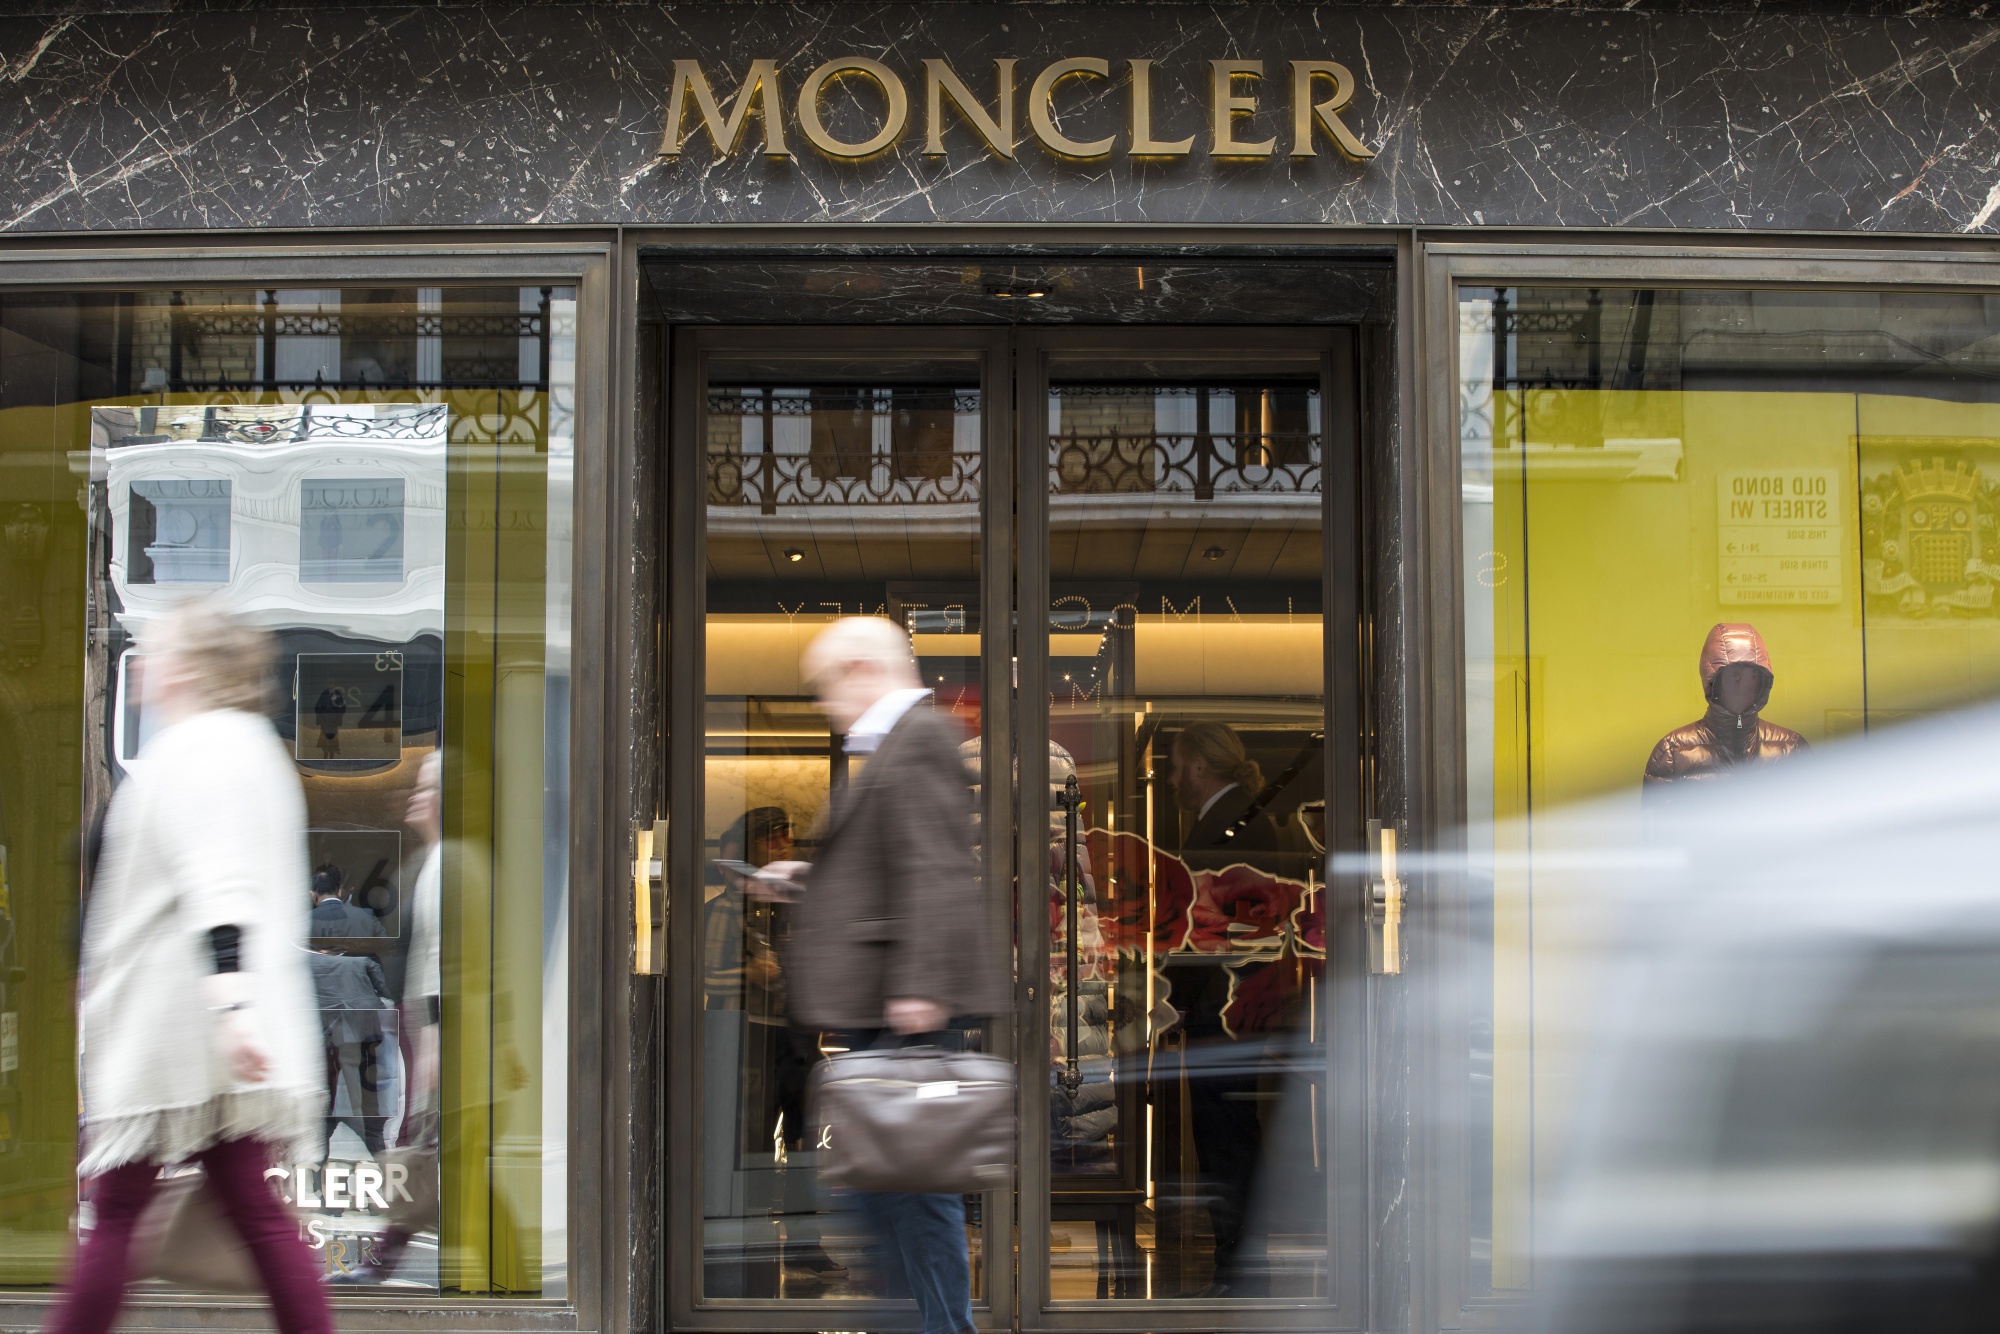 Moncler has acquired Stone Island for 1,16 billion euros